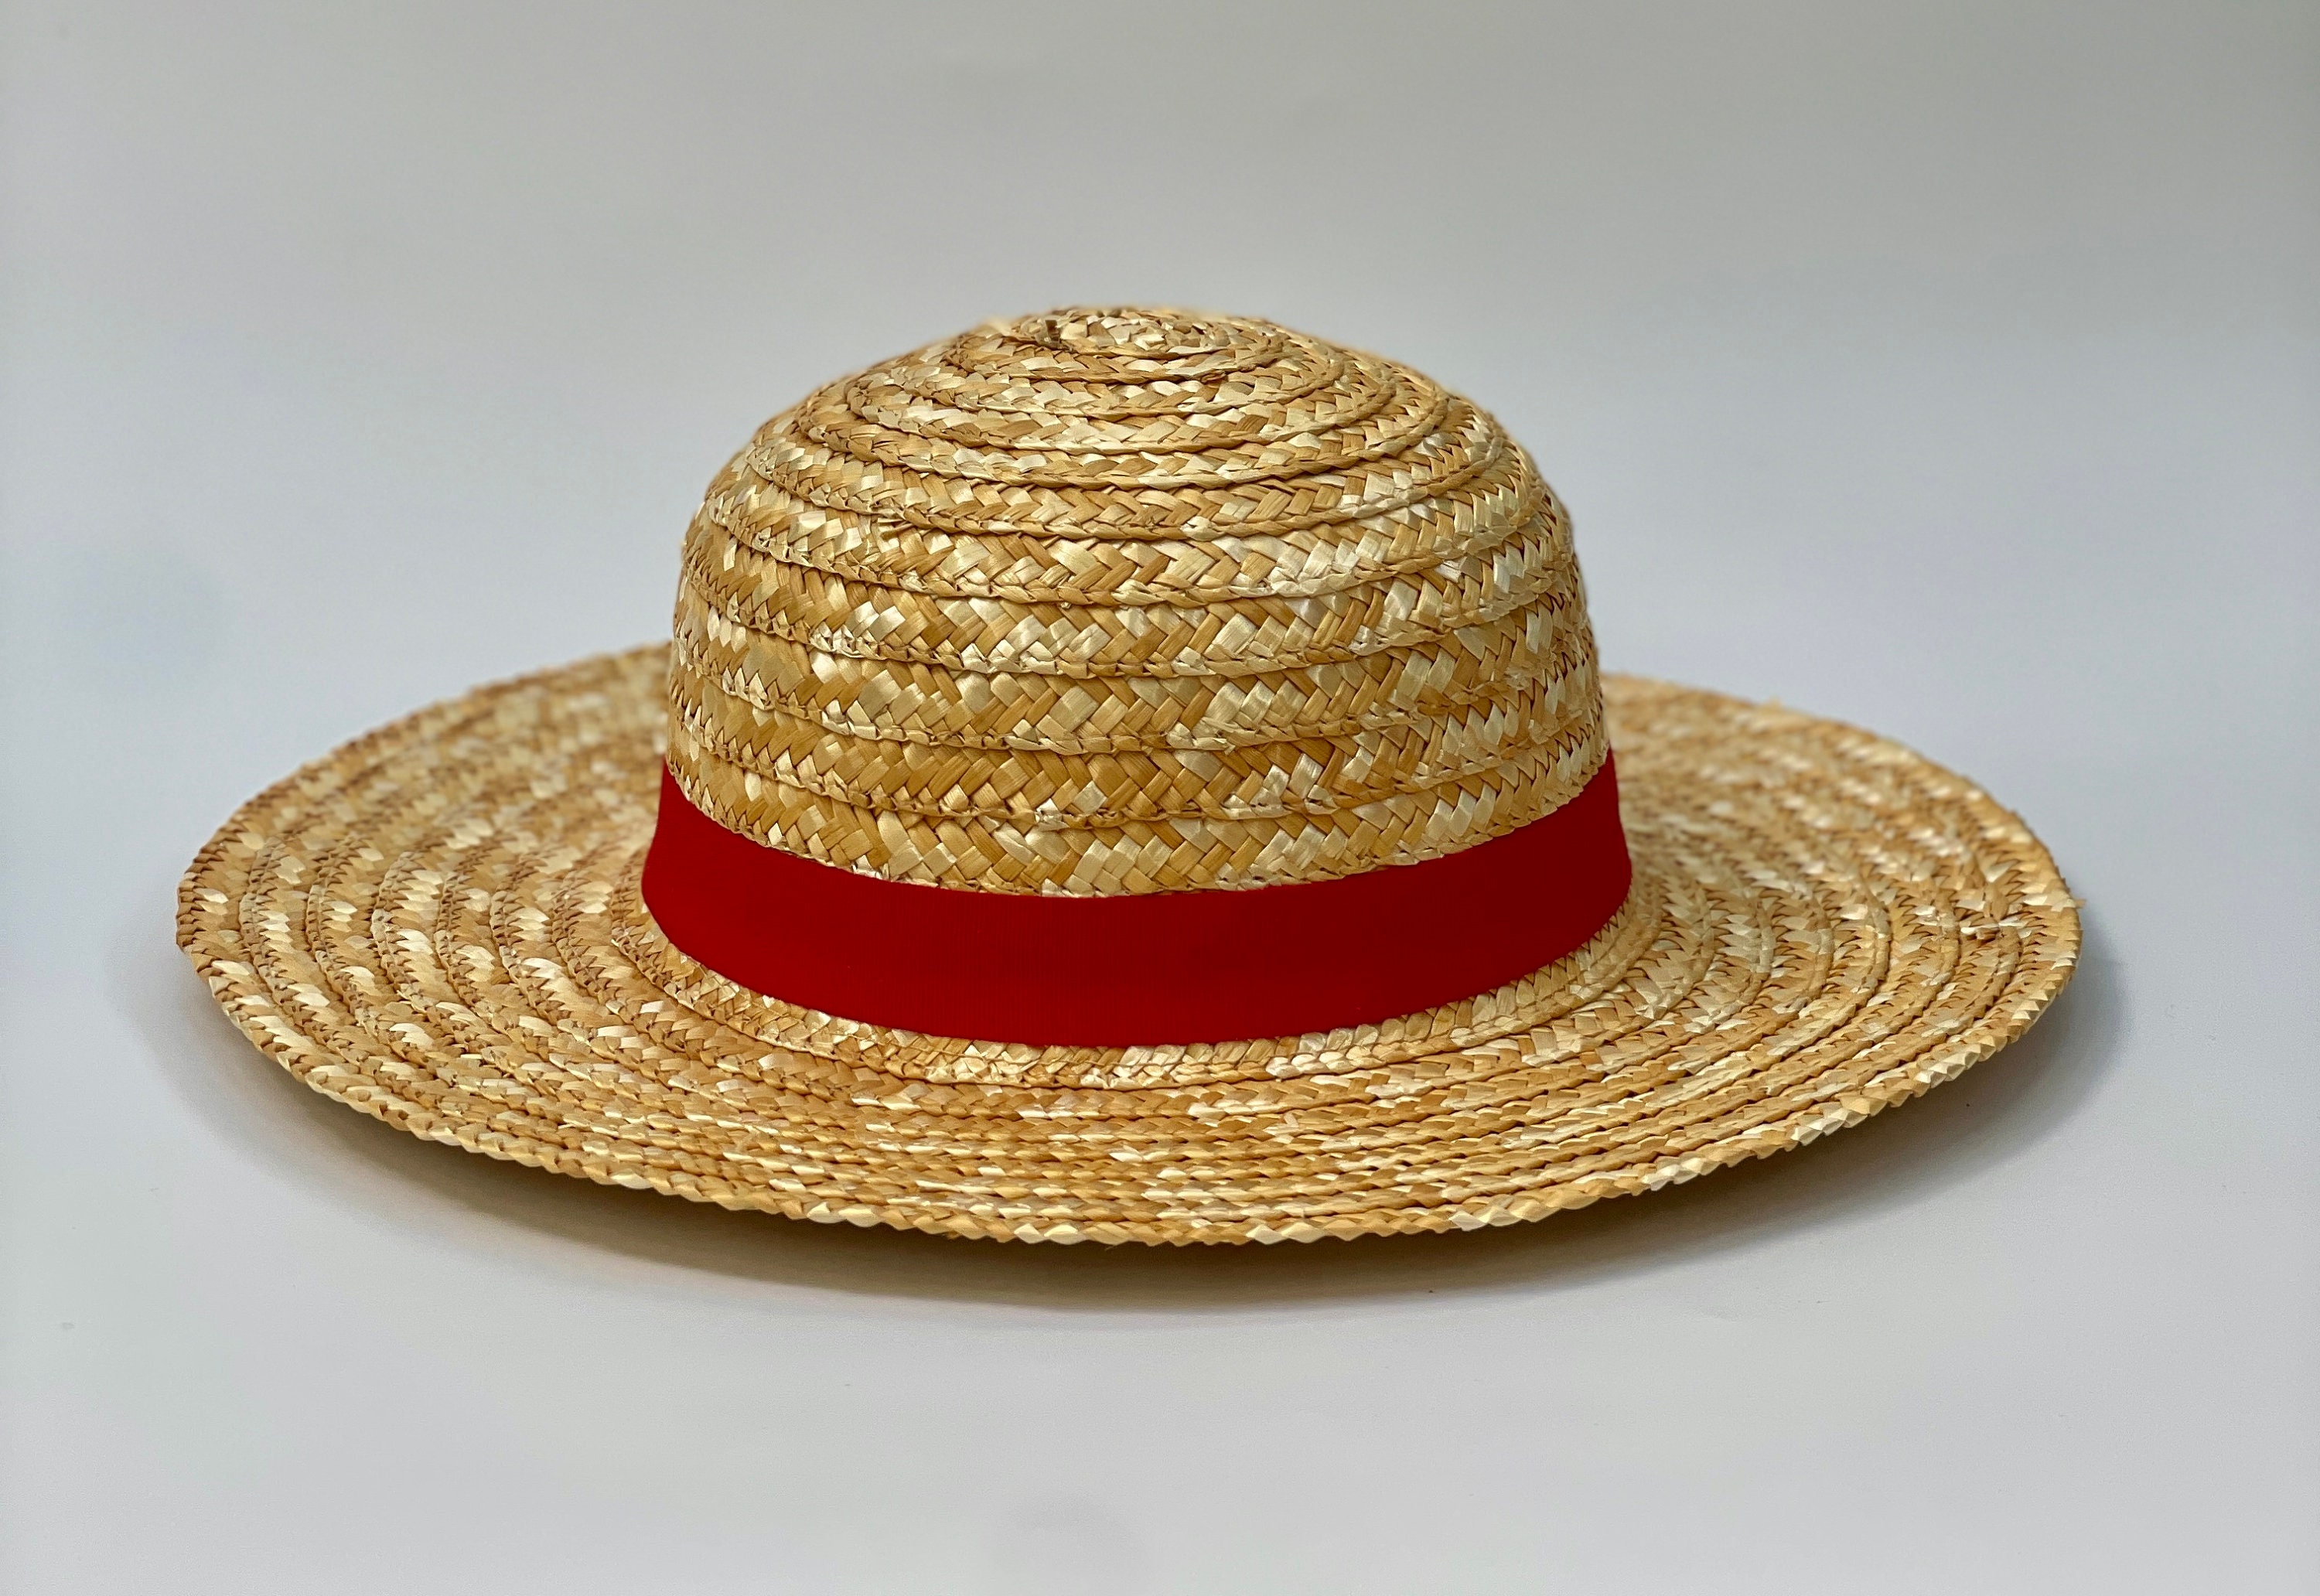 Anime Straw Hat, Cosplay Hat, Anime Hat, Straw Hat, Anime Cosplay  Accessories Hat, Summer Sun Hat, Straw Hats for Men and Women -  UK